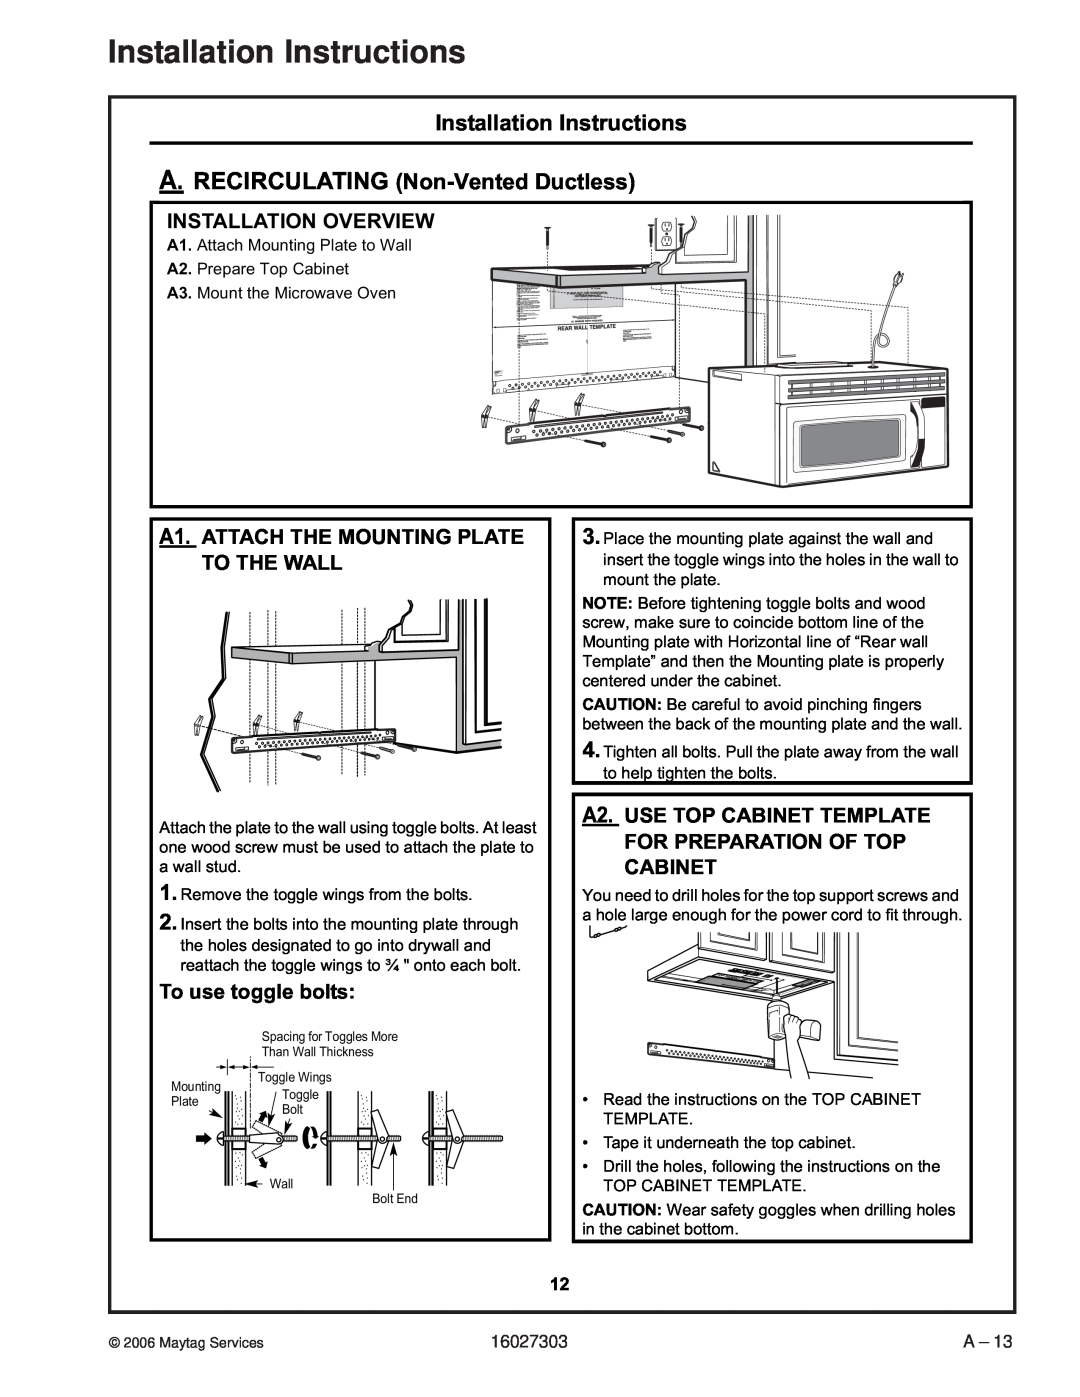 Maytag UMV1152CA manual A.RECIRCULATING Non-VentedDuctless, Installation Overview, A1.ATTACH THE MOUNTING PLATE TO THE WALL 